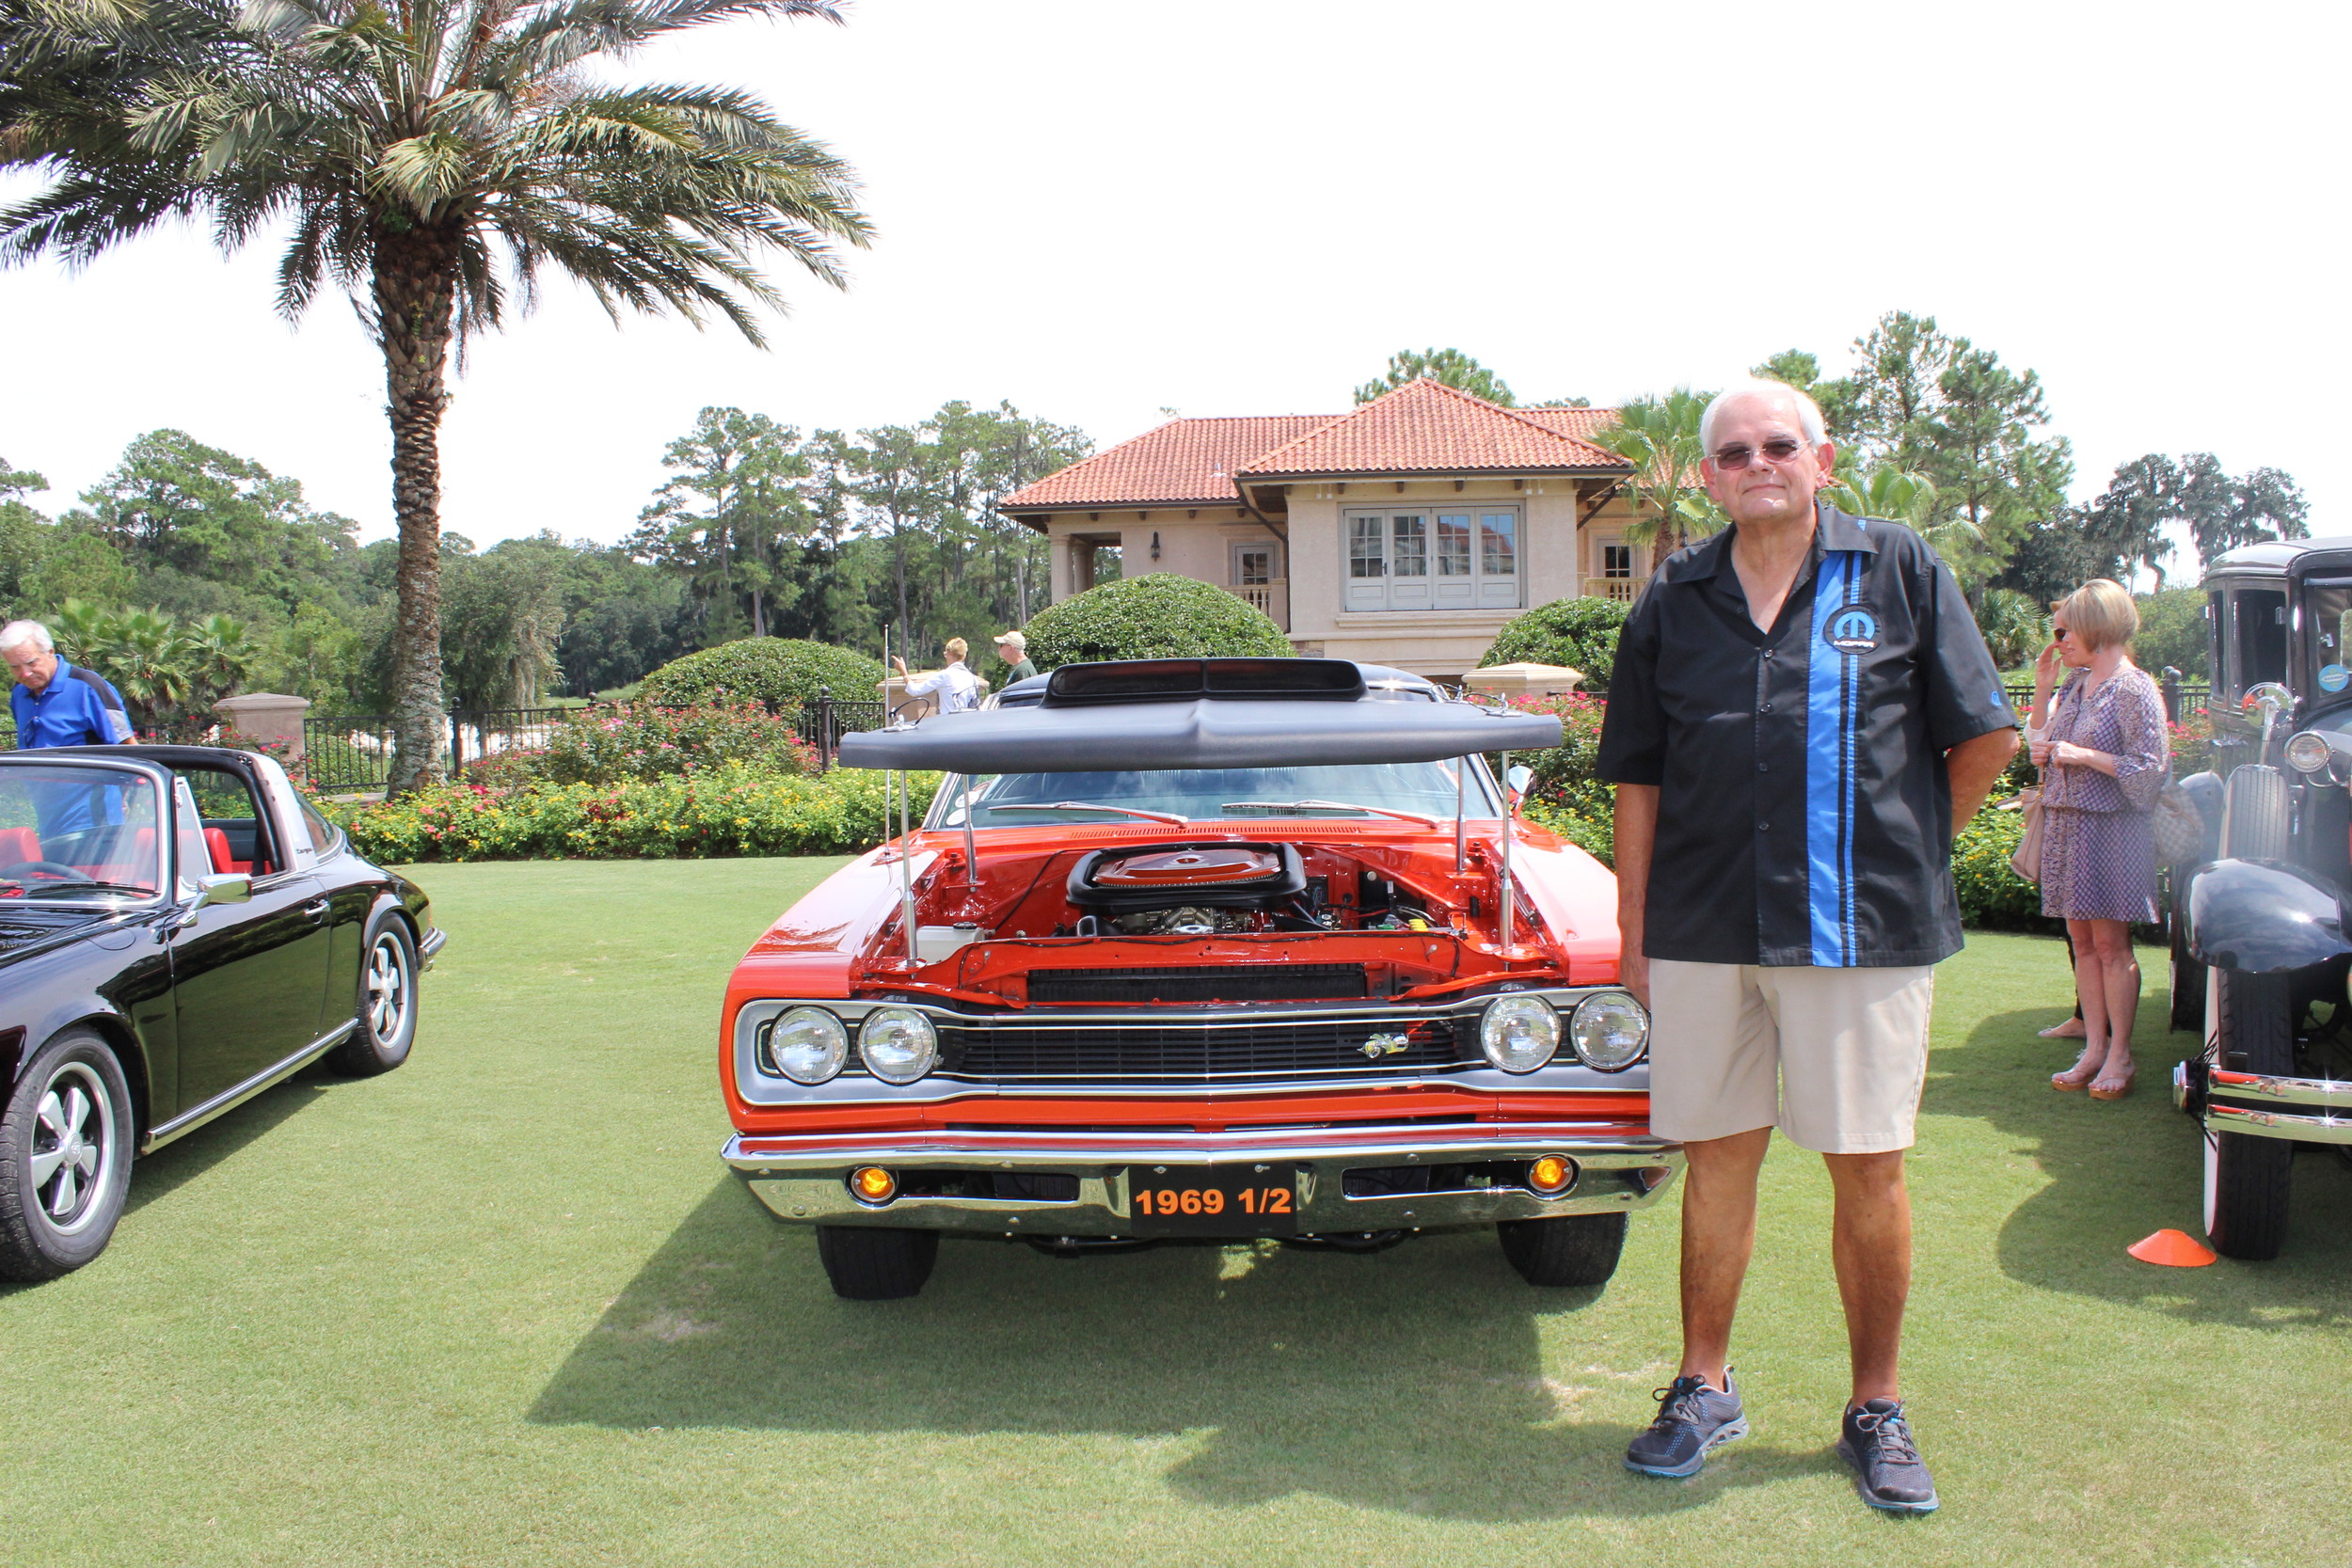 2015 Most Outstanding American Muscle Car (owner Dave Abernathy)